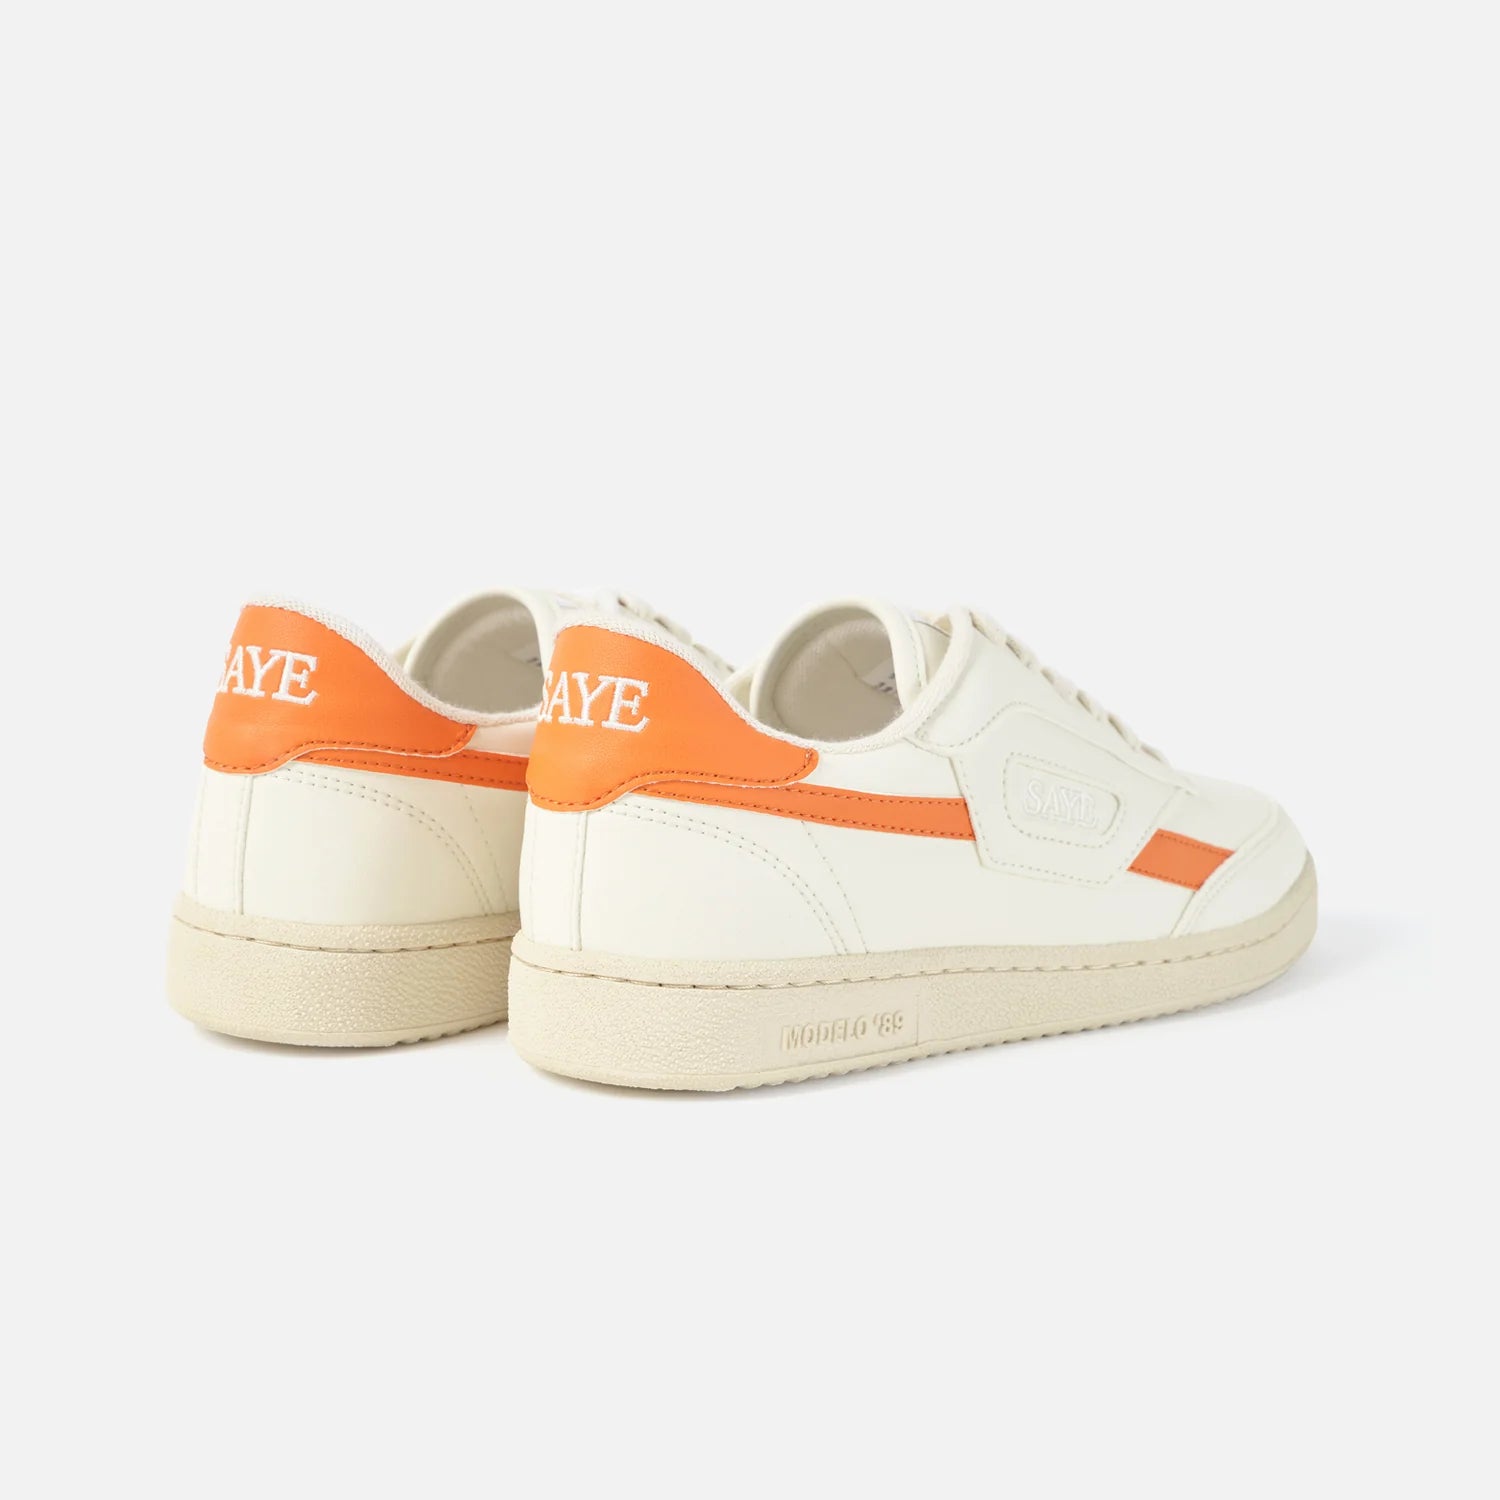 A pair of white SAYE vegan sneakers with orange accents and the text "Modelo '89" on the side.